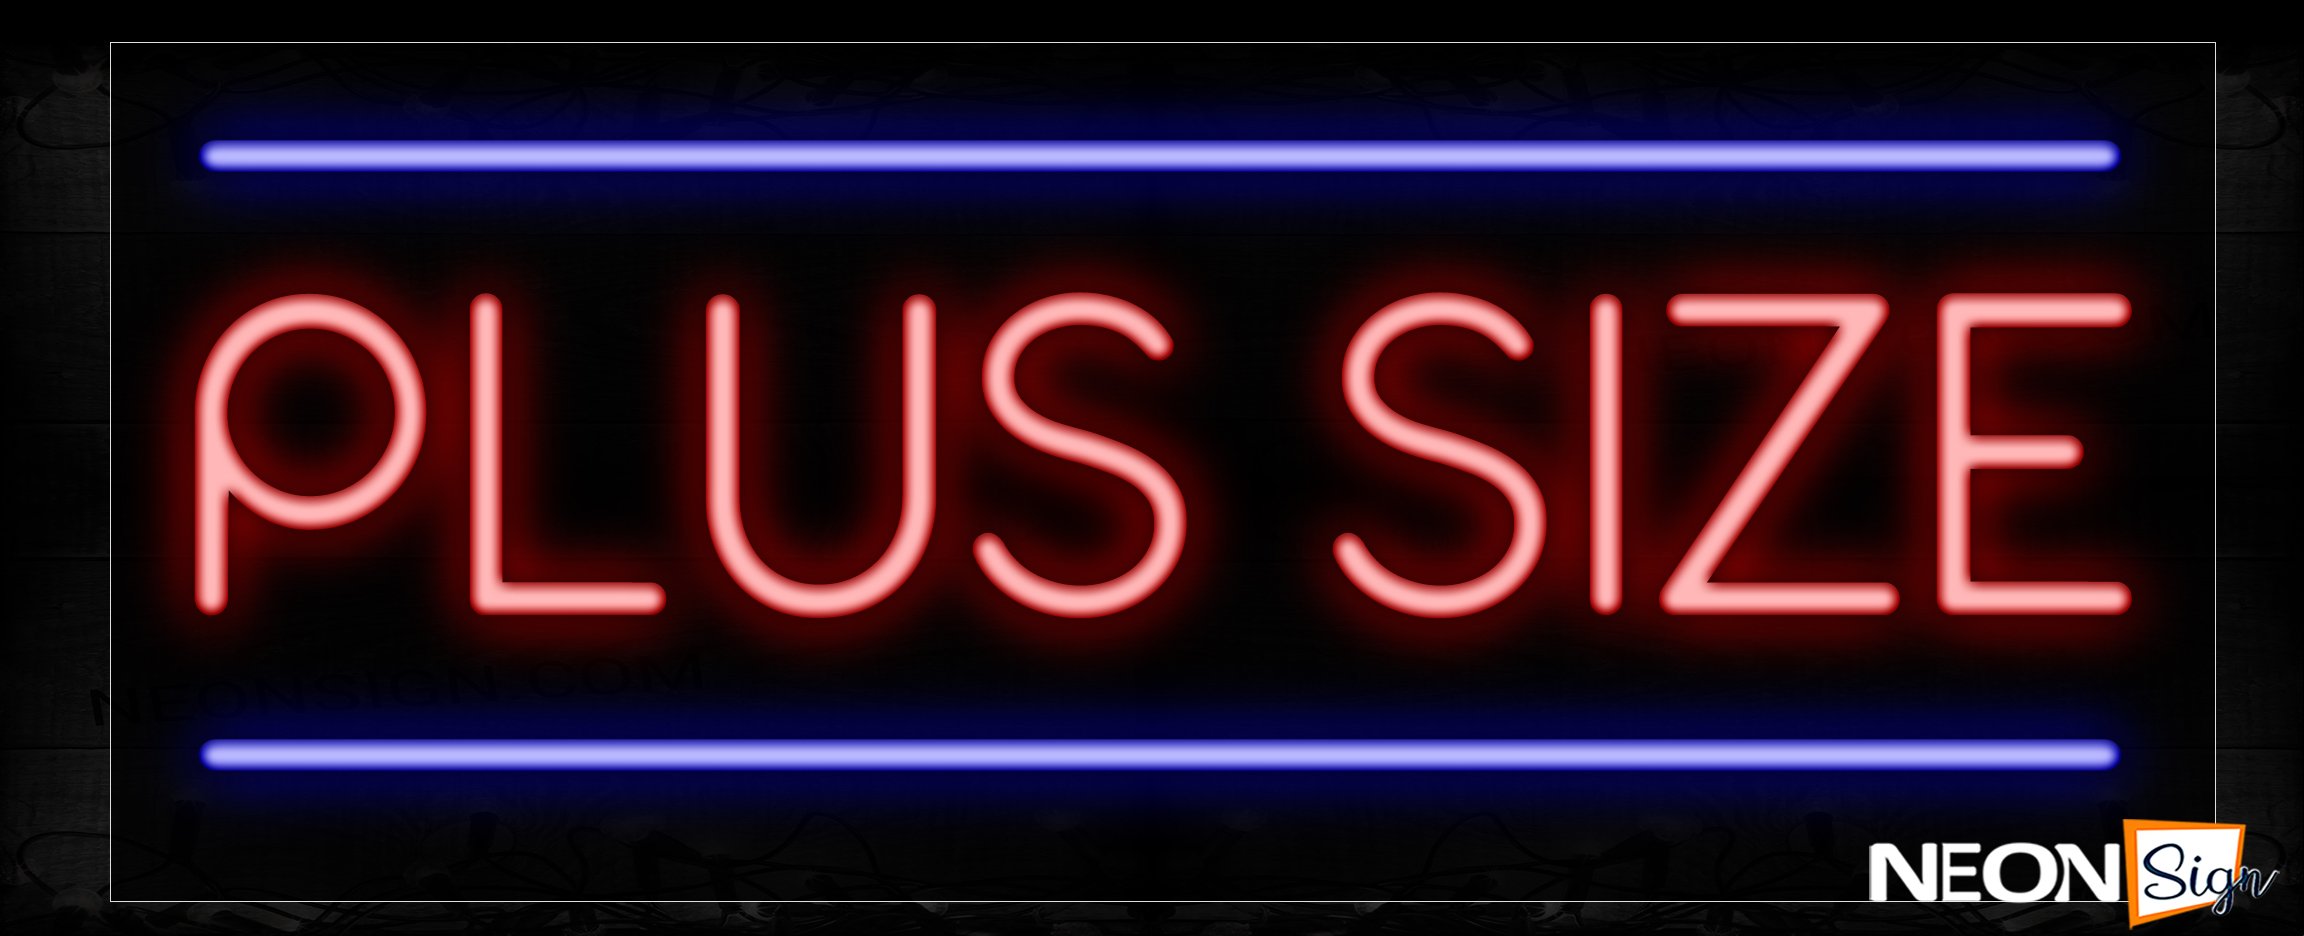 Image of 10611 Plus Size With Horizontal Line Neon Signs_13x32 Black Backing